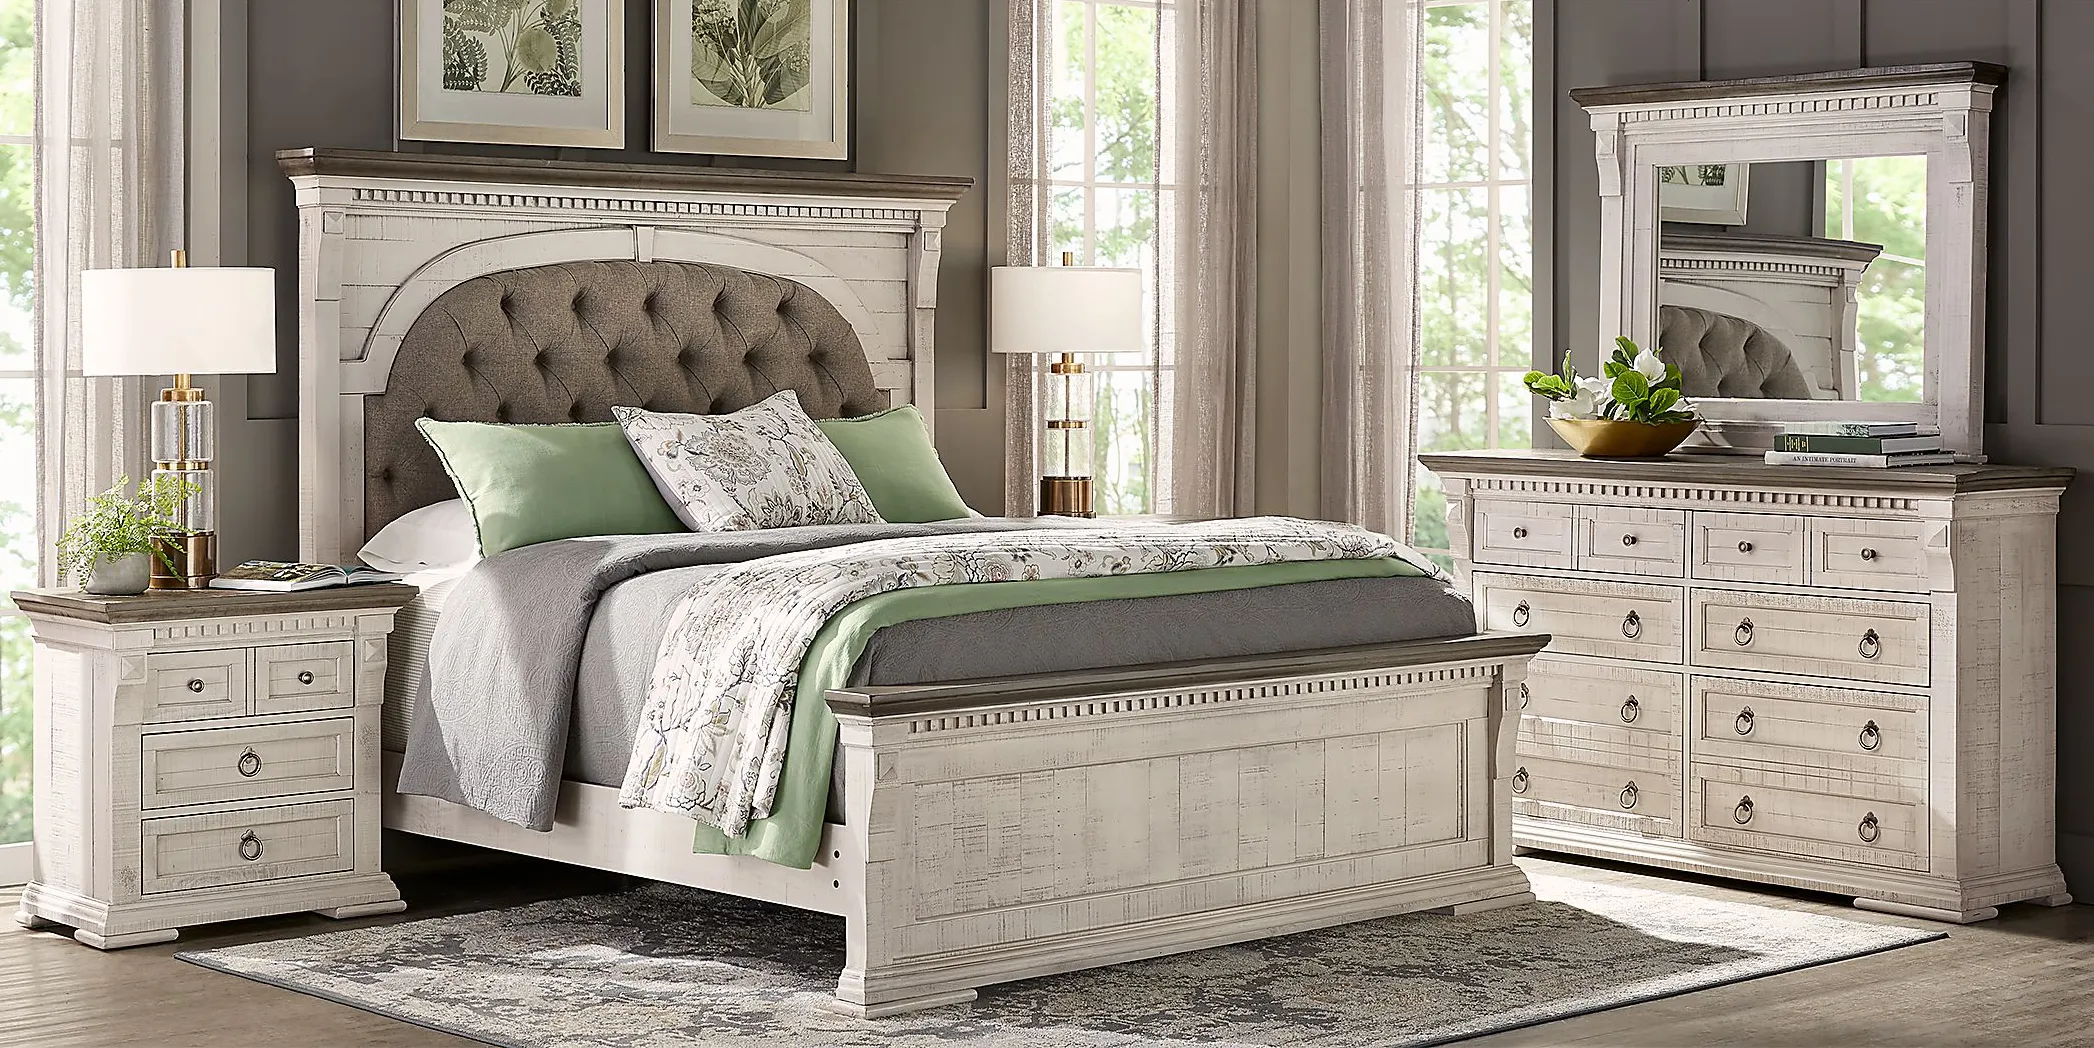 Crestwell Manor White 5 Pc Queen Upholstered Bedroom